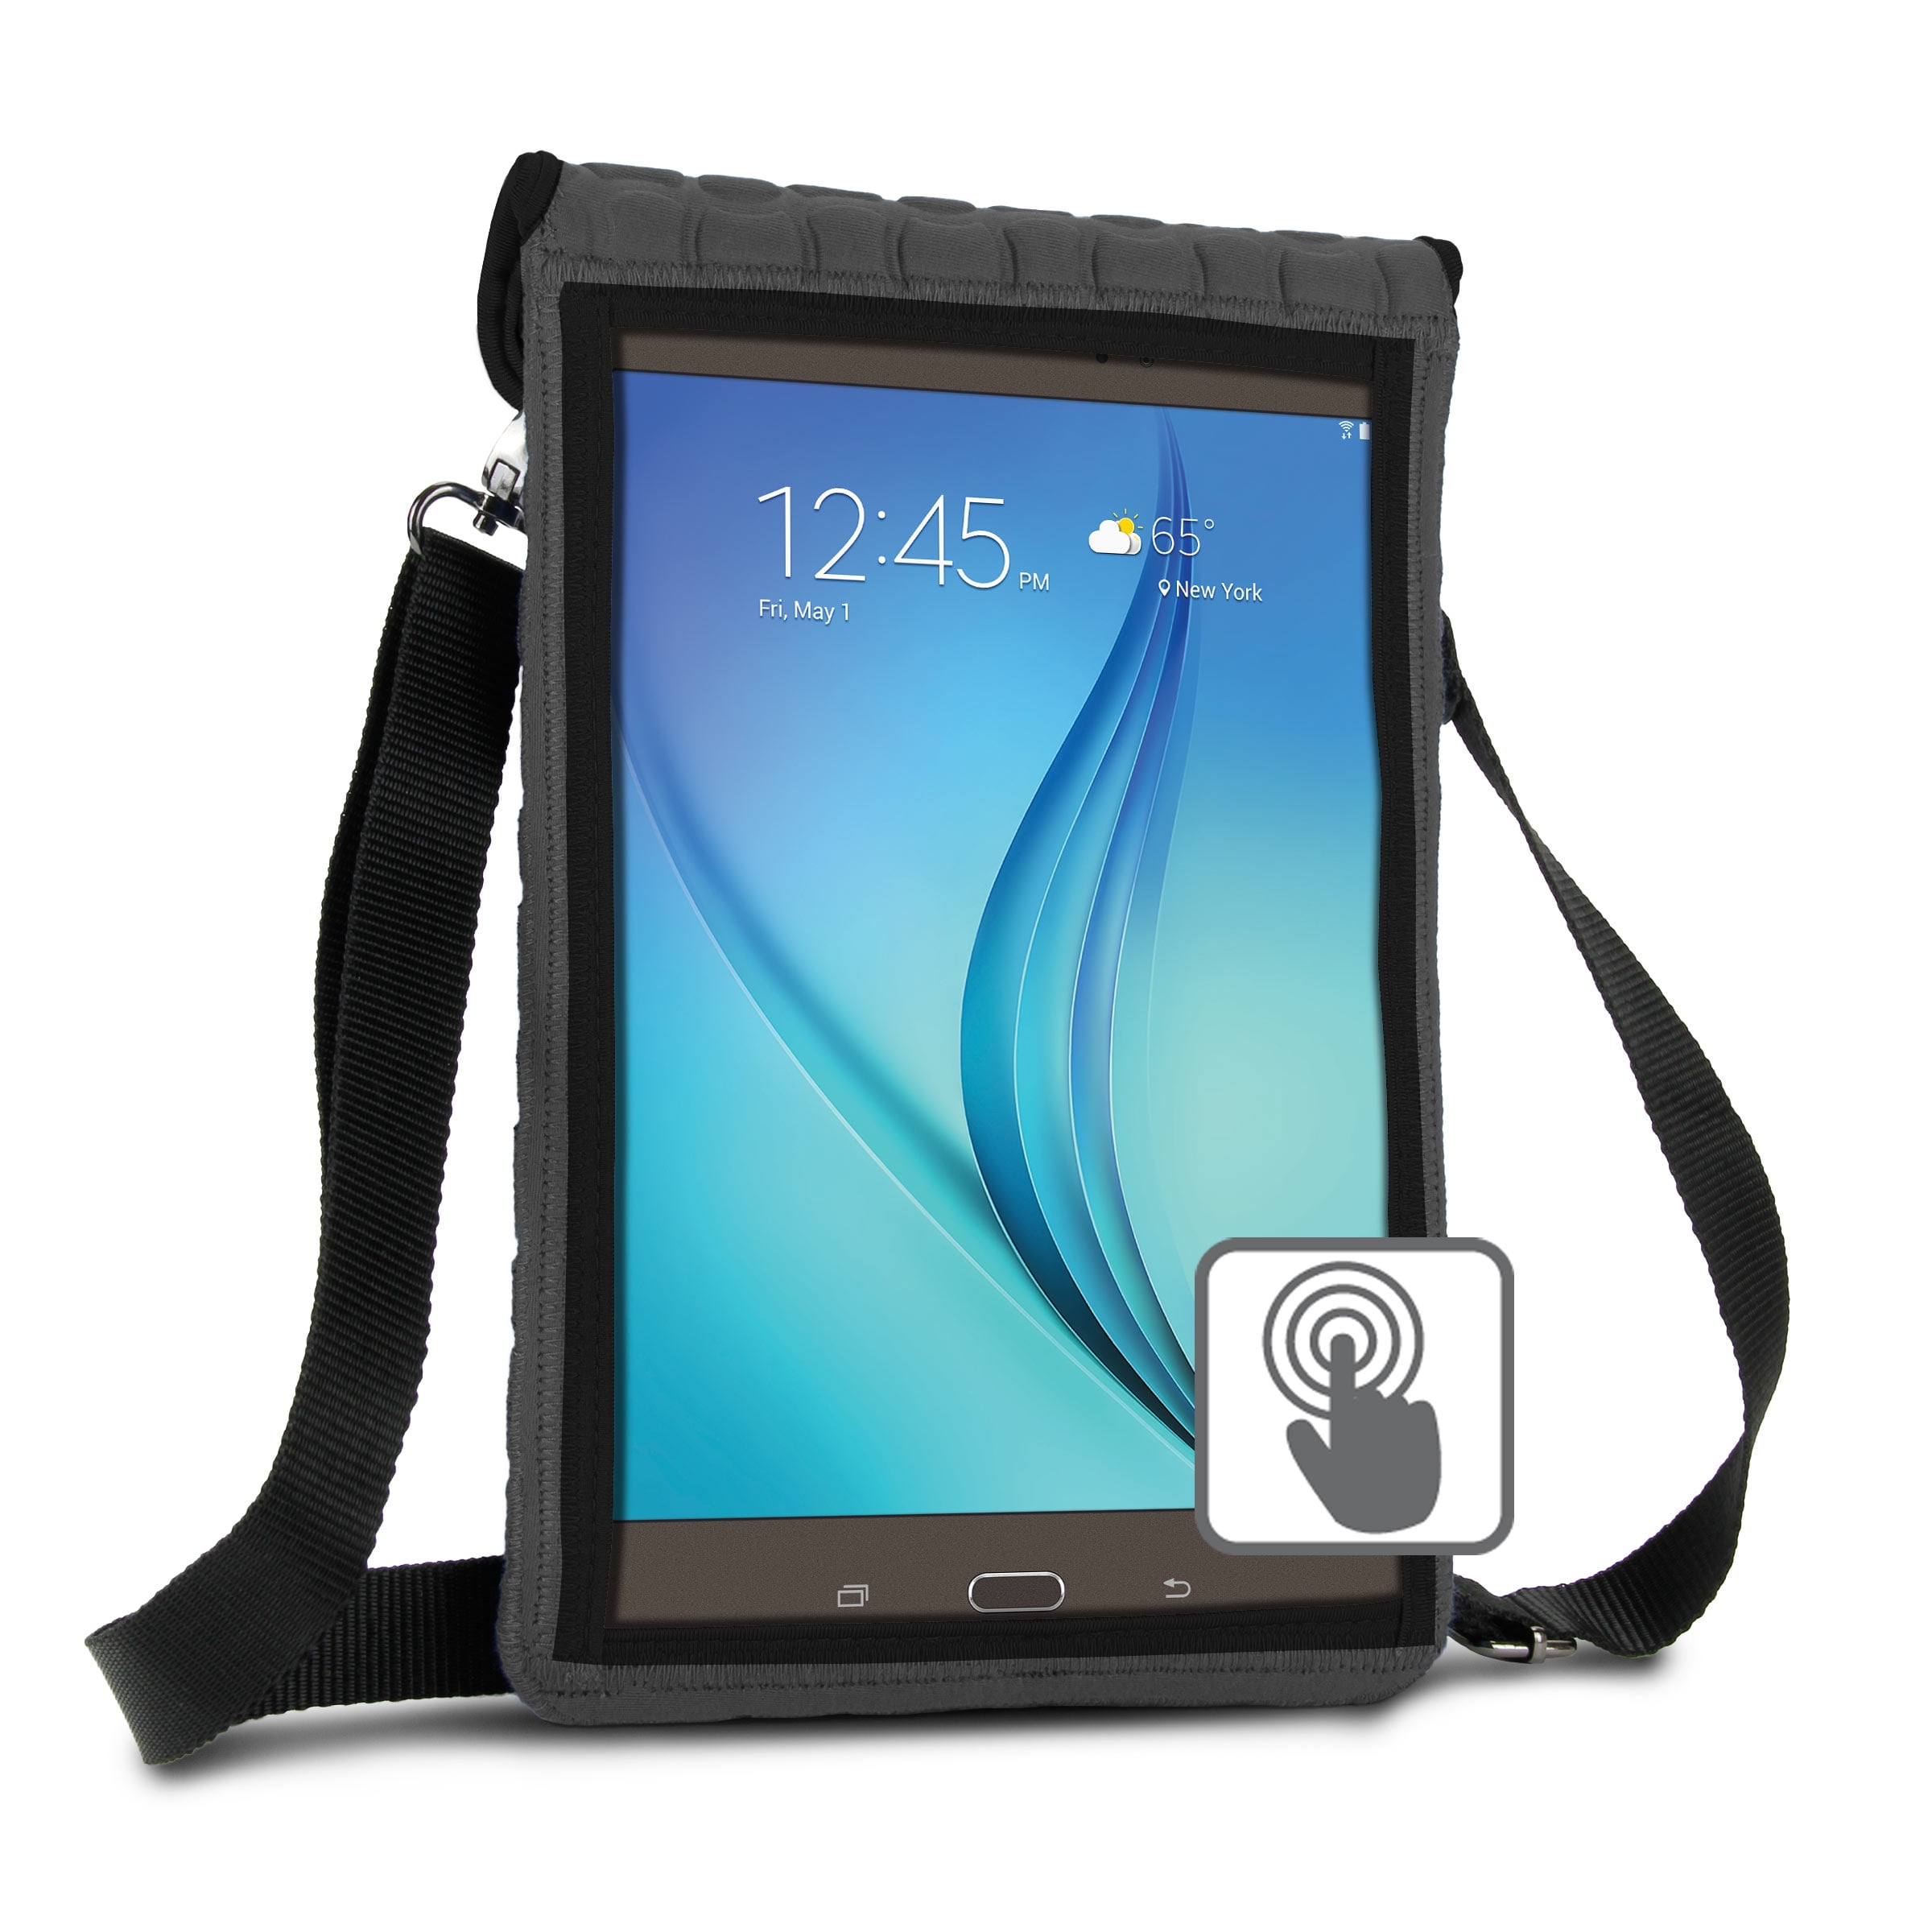 10 Inch Tablet Case Holder Neoprene Sleeve Cover by USA Gear (Grey) Builtin Screen Protector